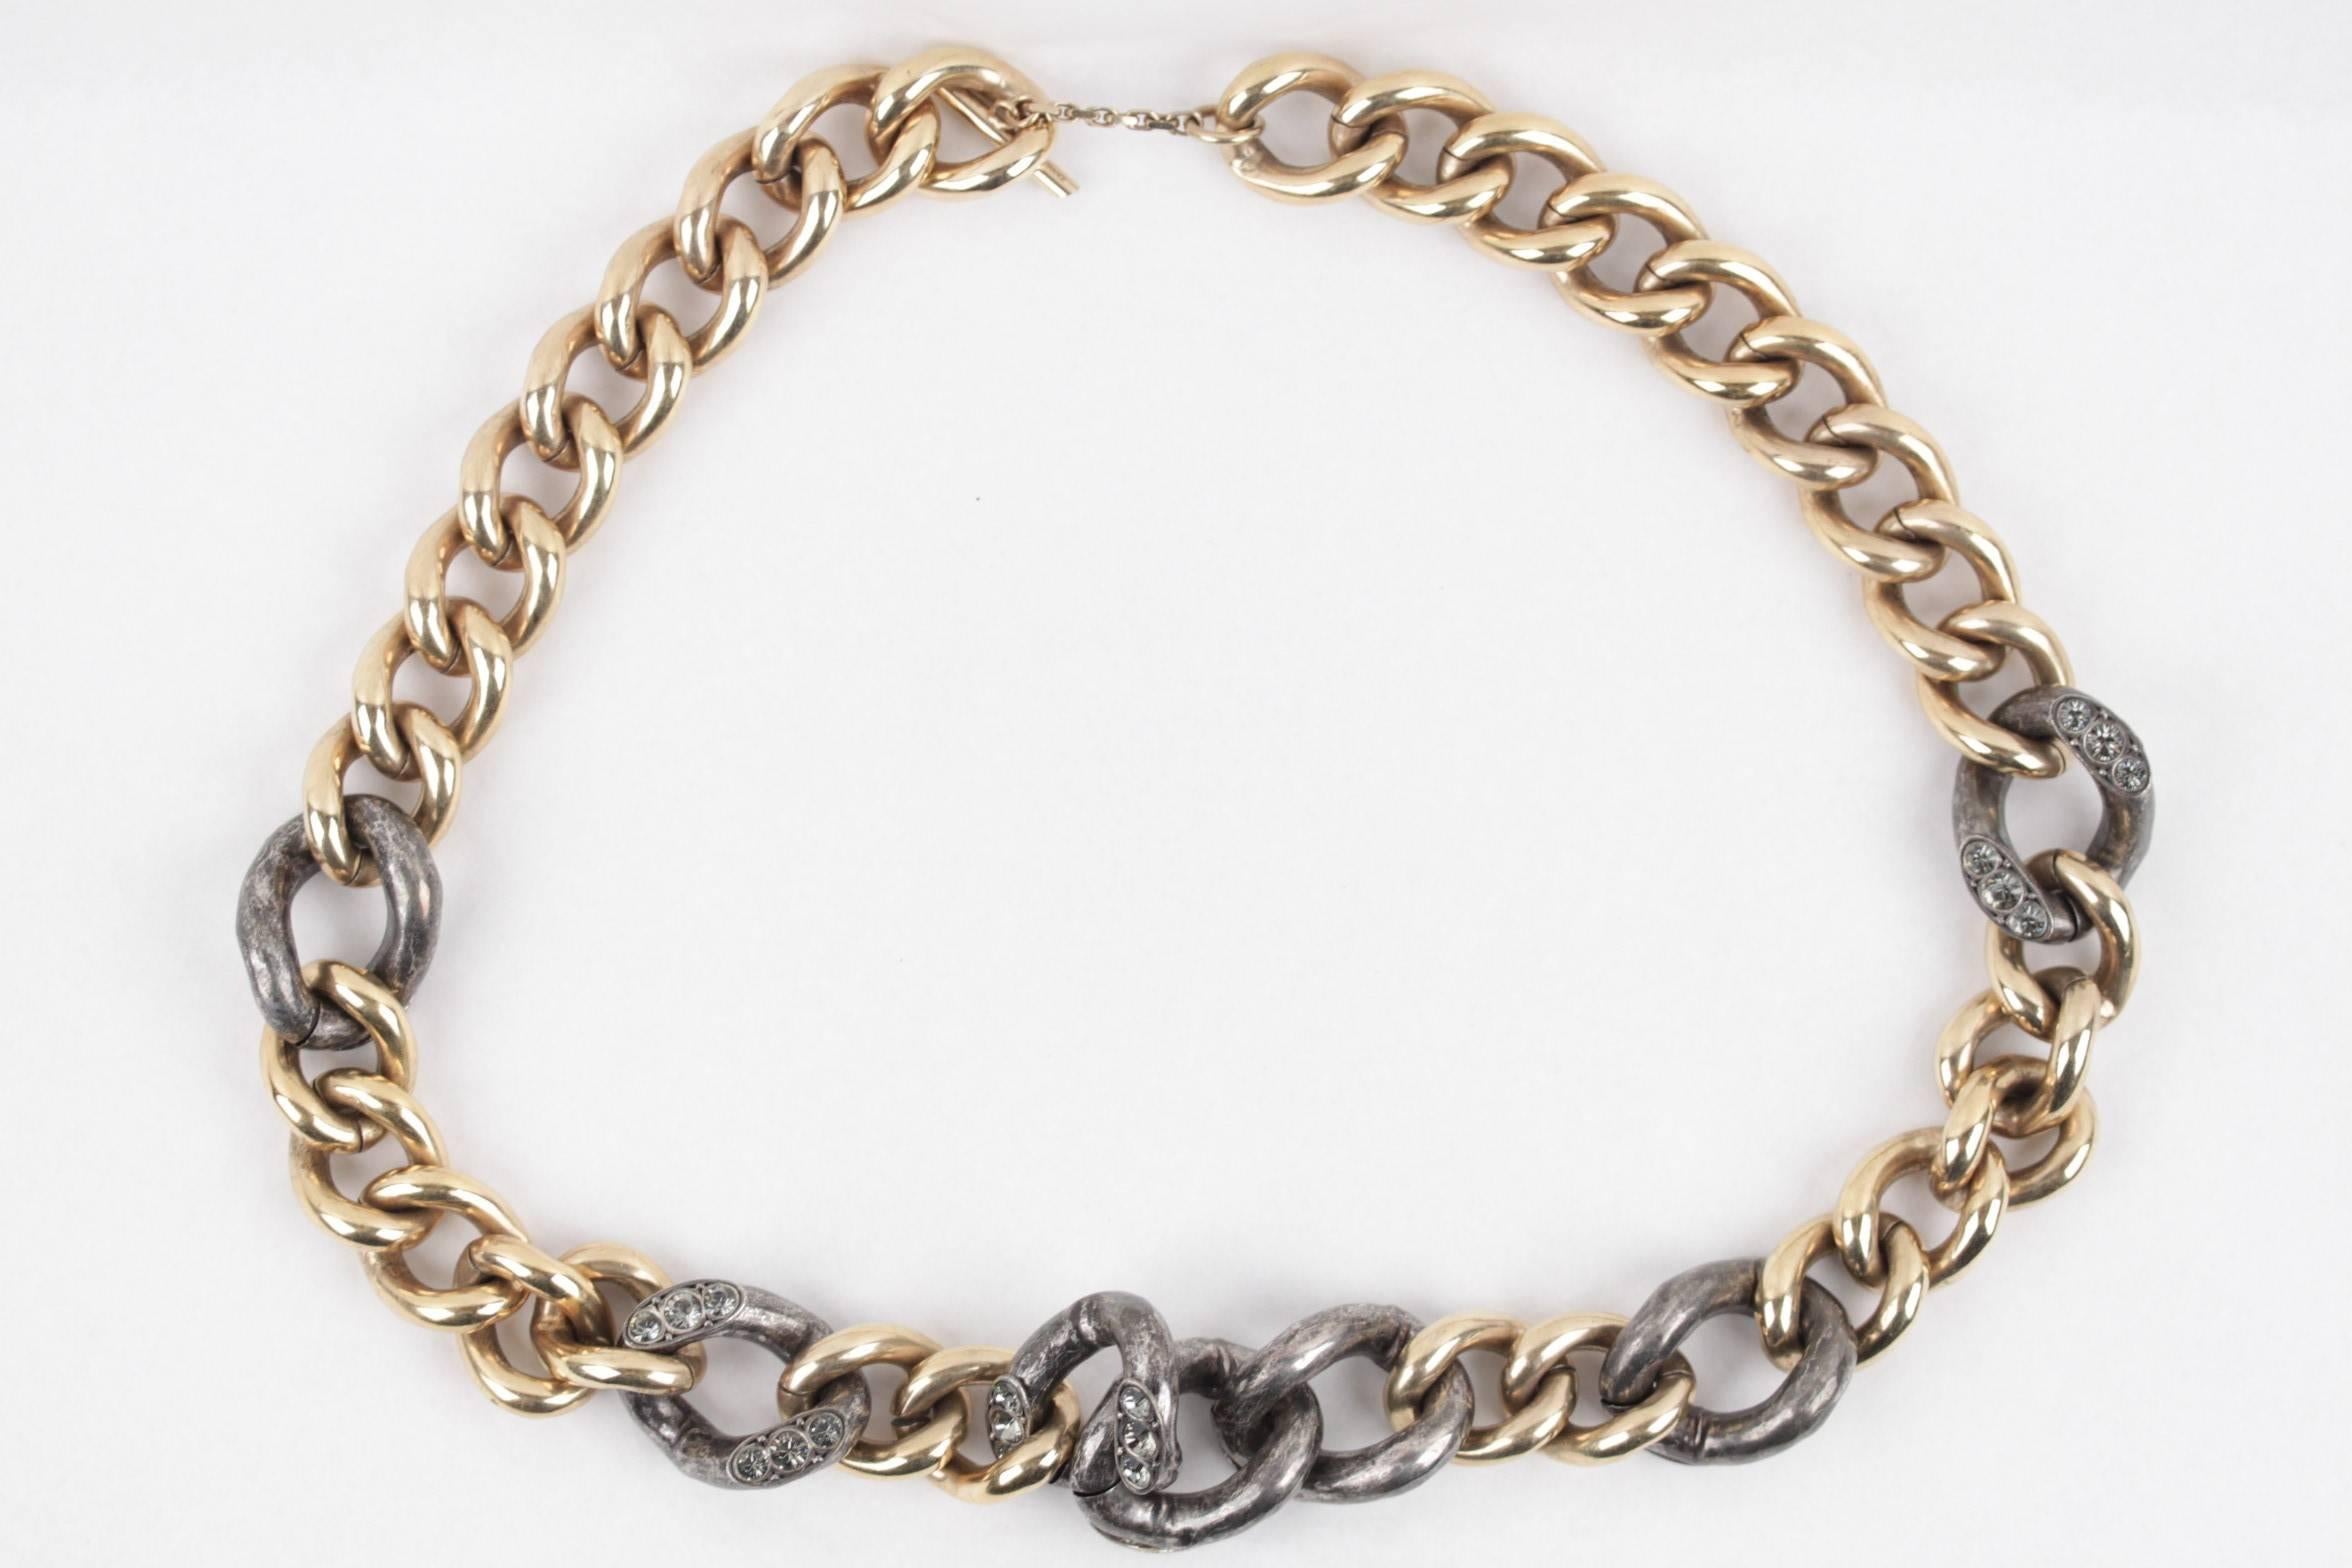 - LANVIN Large Chunky 'Gourmette' Chain Link Long Necklace
- Two-tone style (gold & Silver metal)
- Crystal detailing
- Toggle closure
- Stamped 'LANVIN - Made in France' on toggle
- Approx. measurments: 26 inches - 66 cm

Condition rate